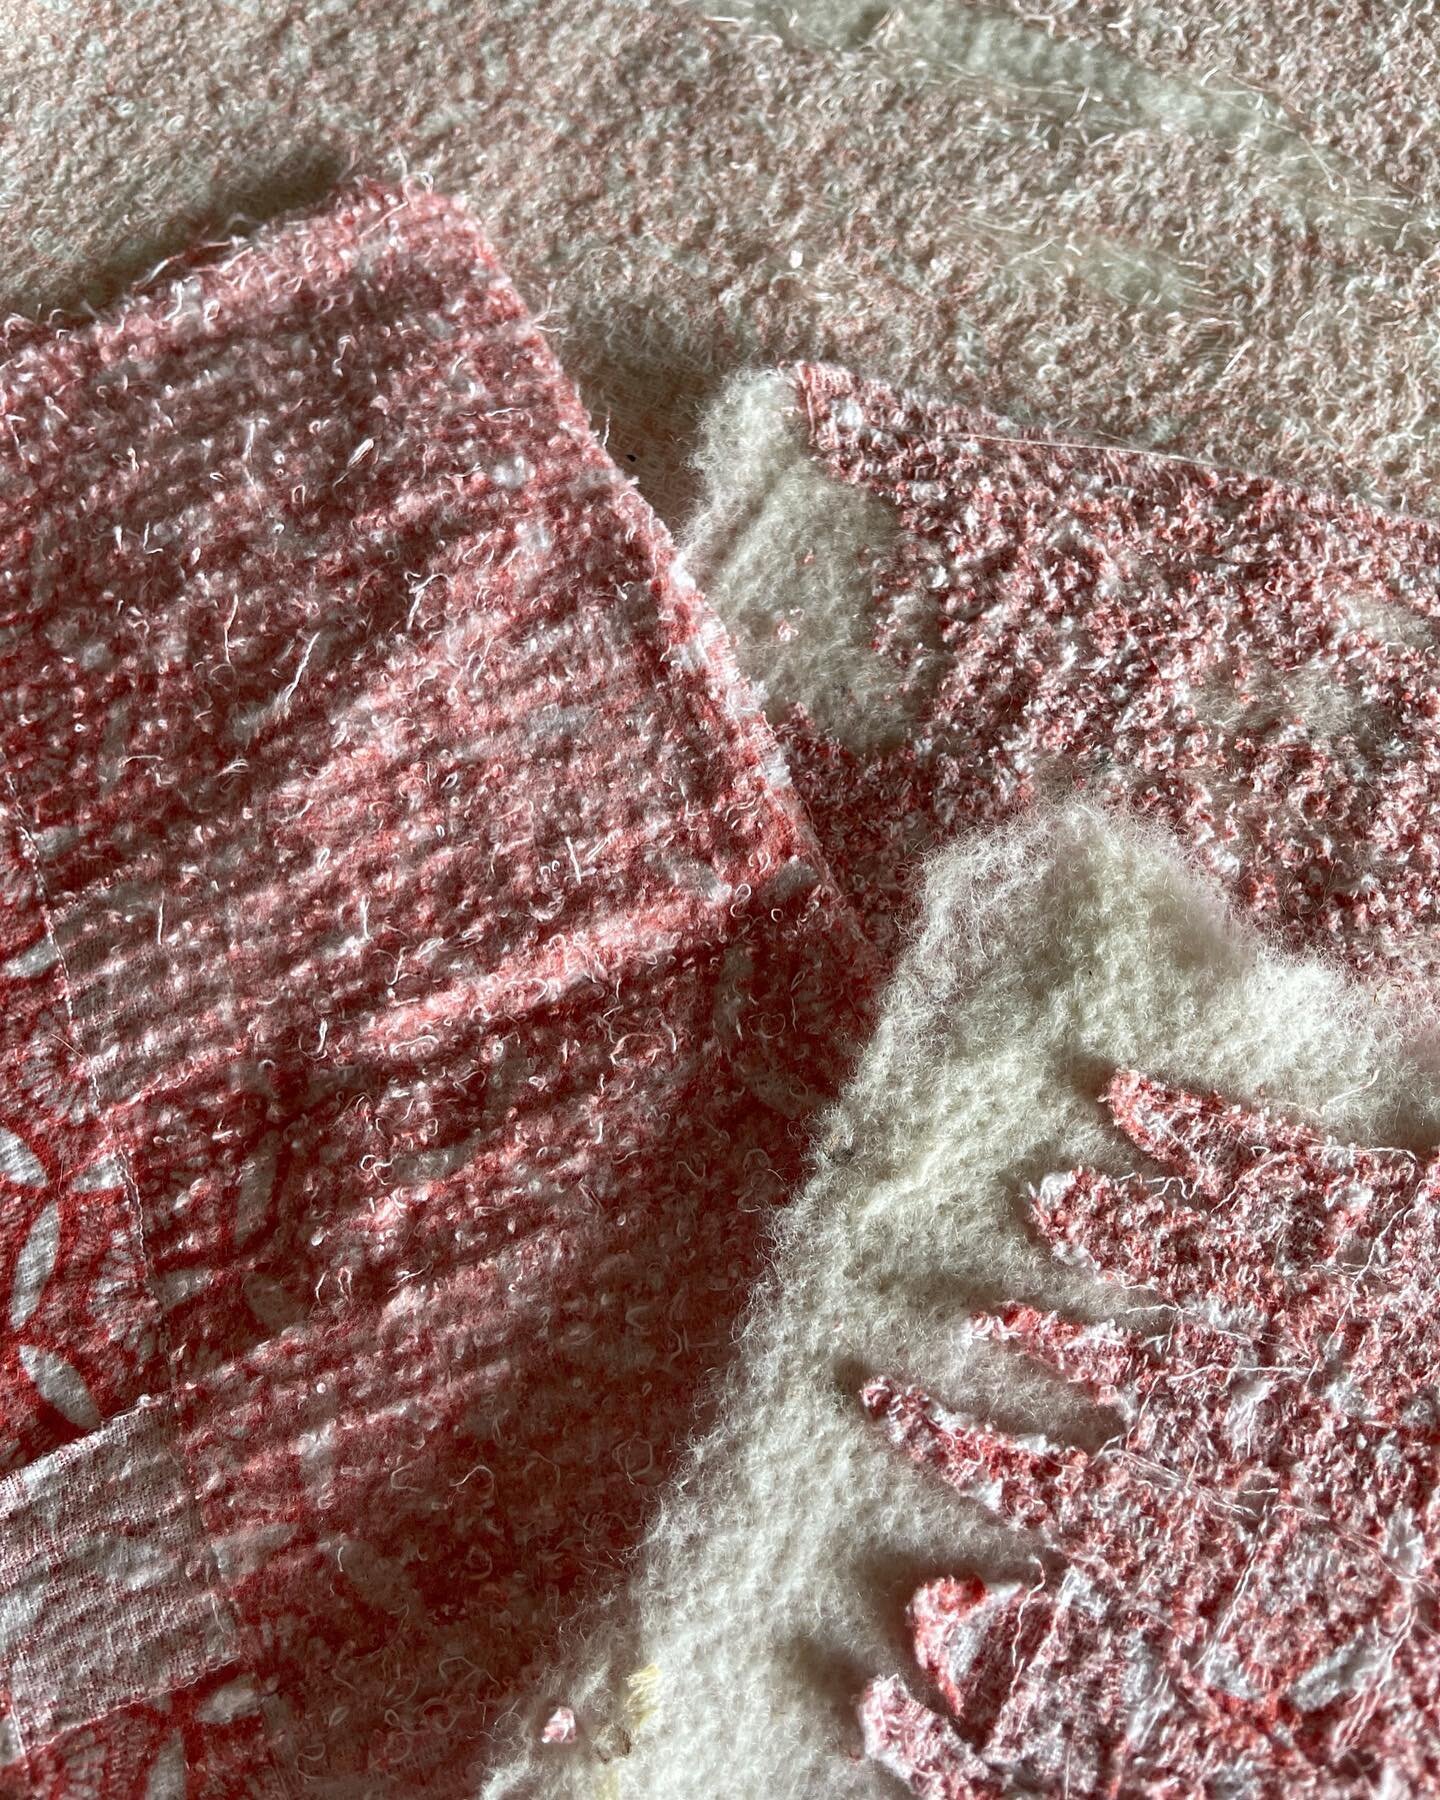 Exploring ways to revalue bedlinen through prototyping for my PhD - these samples are needle-felted flannelette and have a terry-towelling finish. #circulardesign #circulartextiles